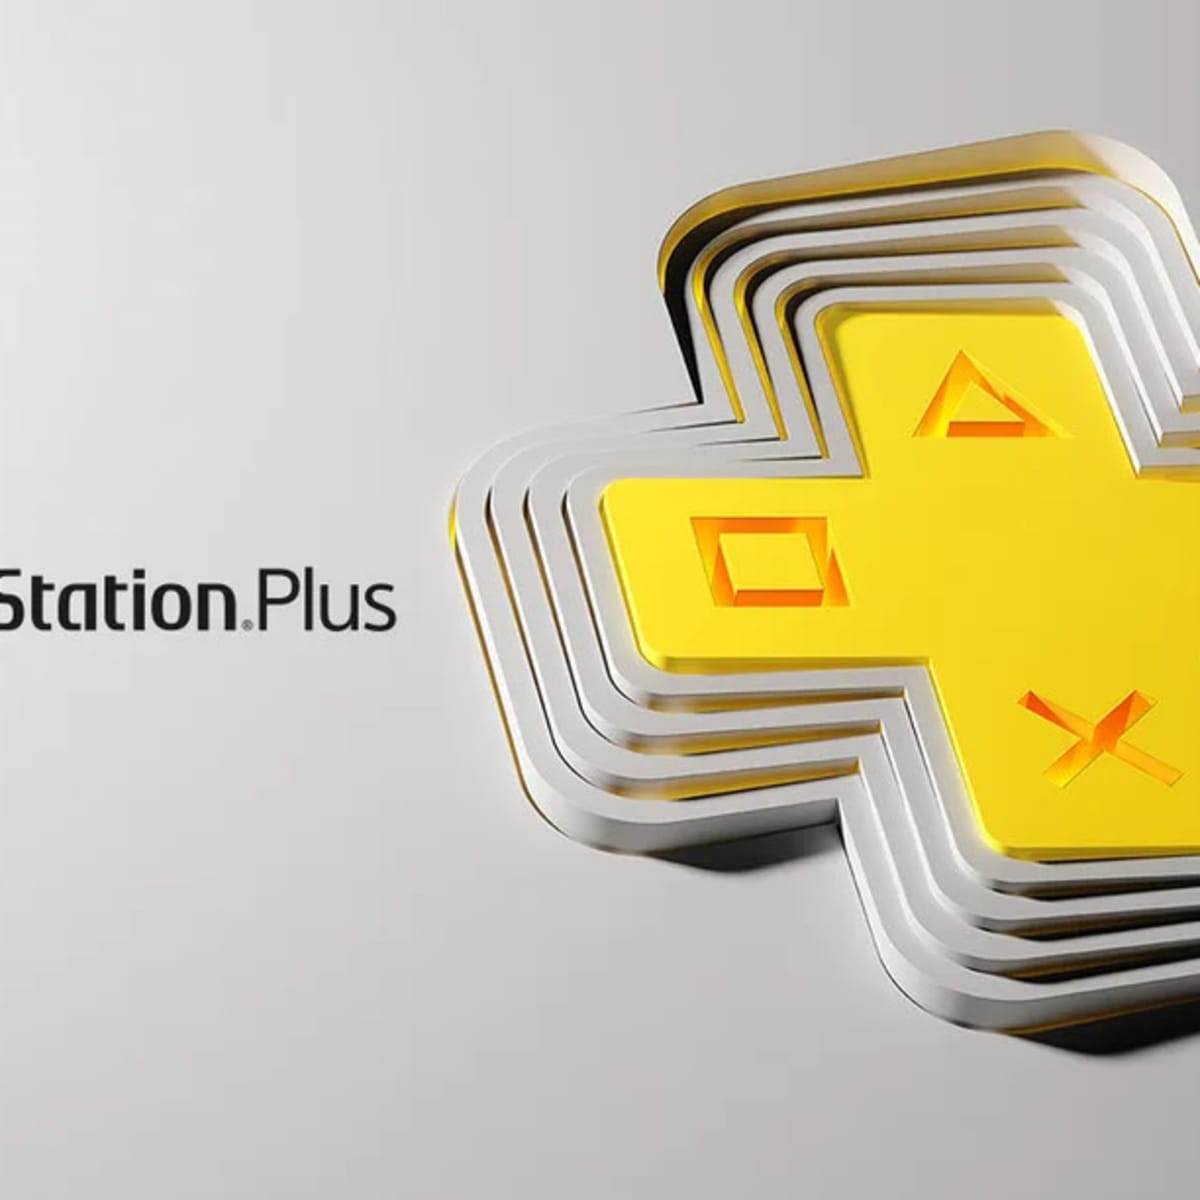 GTA V Free for PlayStation Plus Extra & Premium Subscribers through Game  Catalog Starting December 19